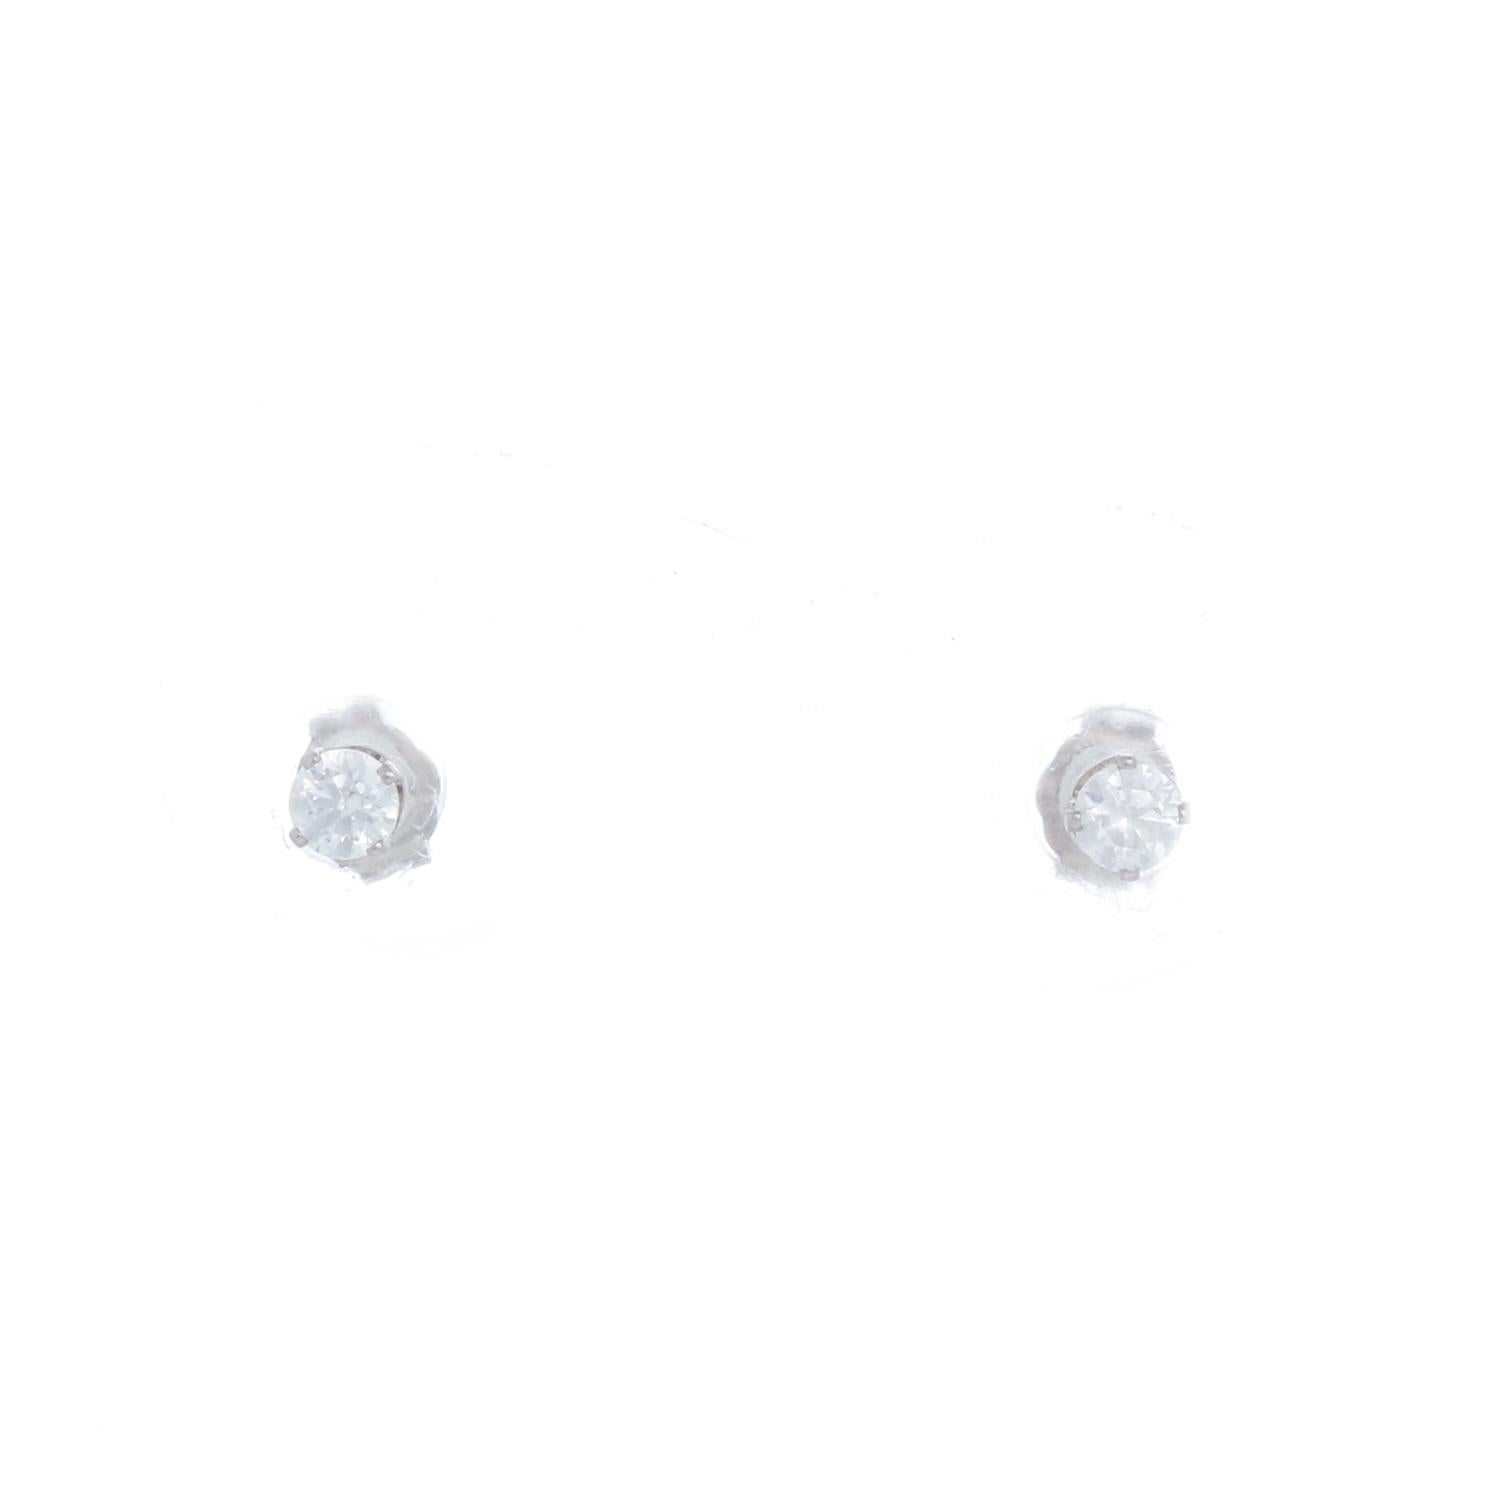 14k White Gold Studs .25 cts - Dainty 14K White Gold studs weighing .25 carats. Color H clarity - VS2 - Perfect for a first pair of studs! 